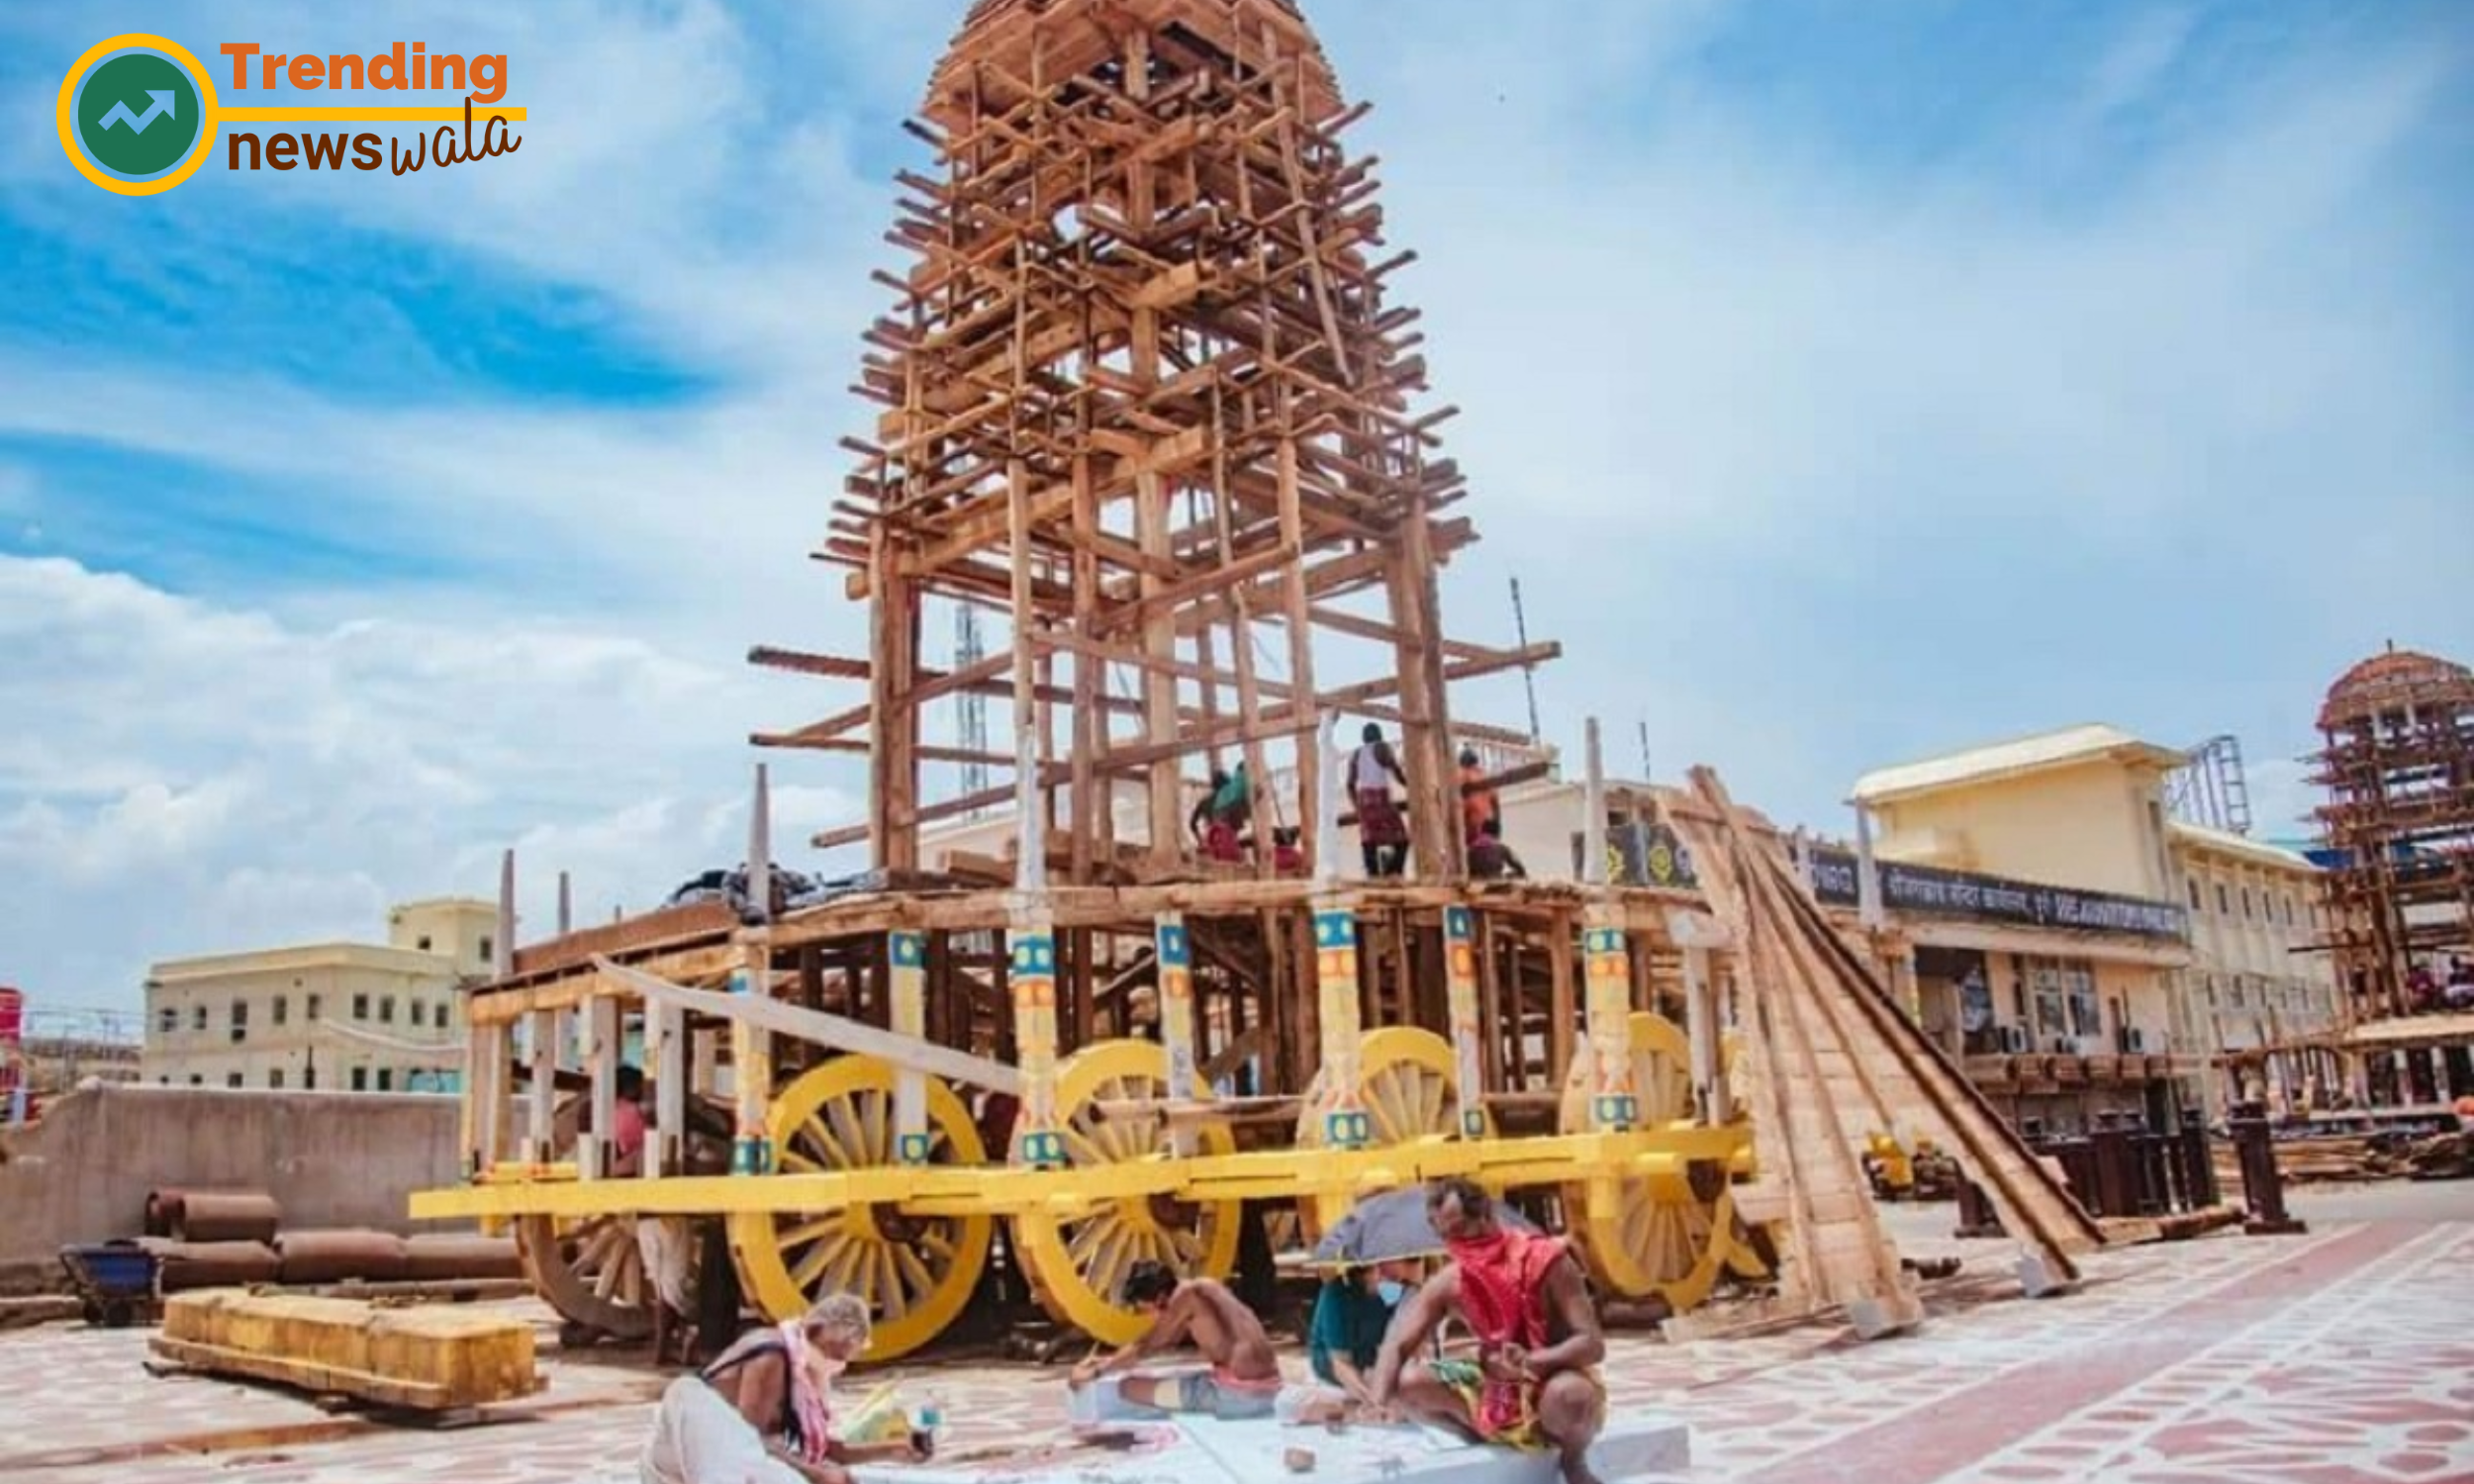 Ratha Yatra chariot construction and design Traditional materials such as wood, ropes, cloth, and natural dyes are predominantly used